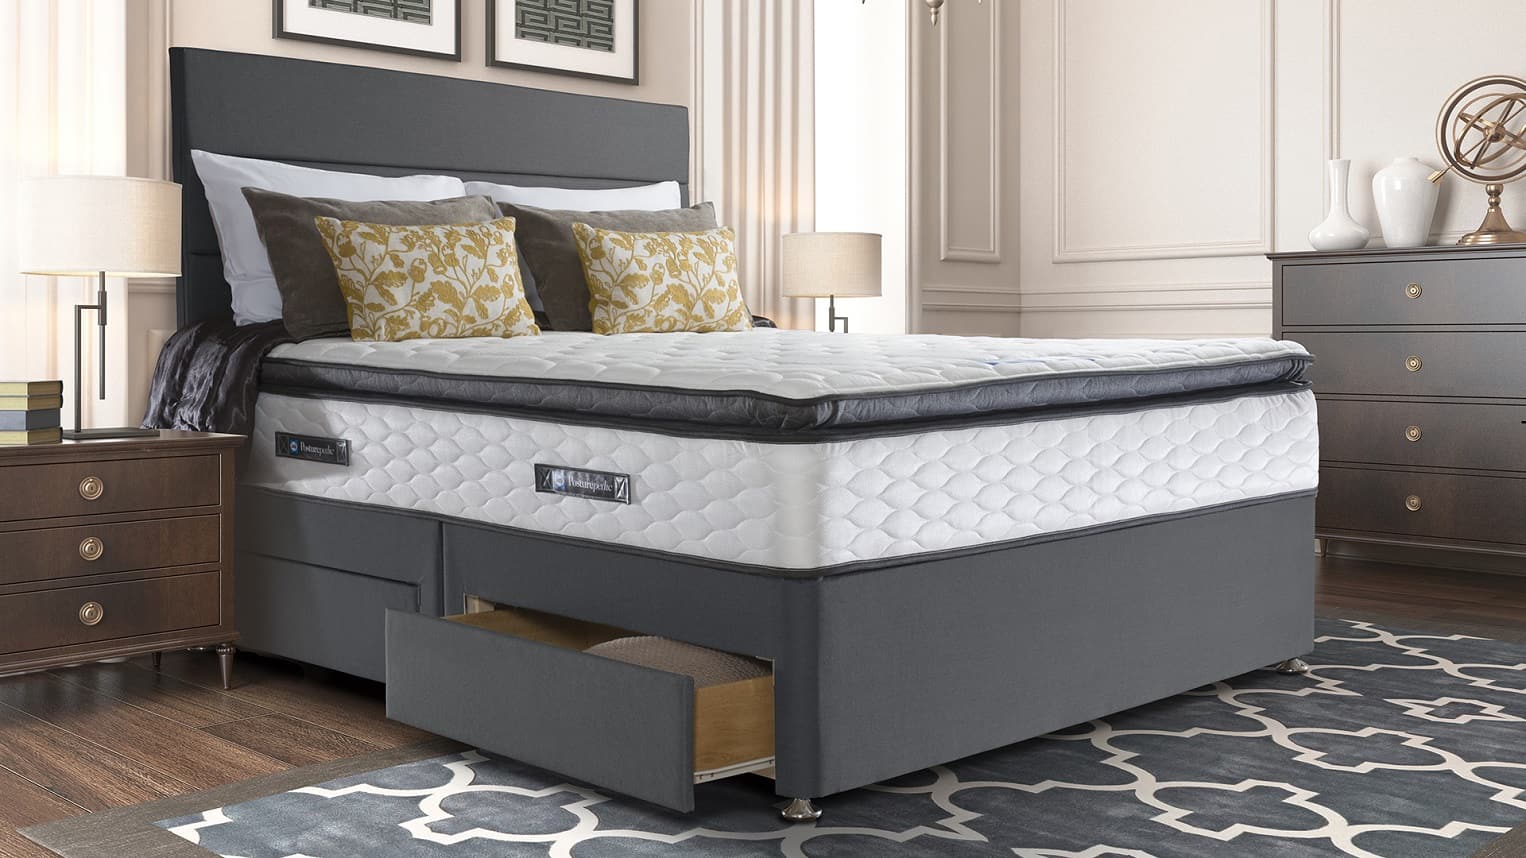 Costco Mattress: What Is The Best Mattress From Costco ...